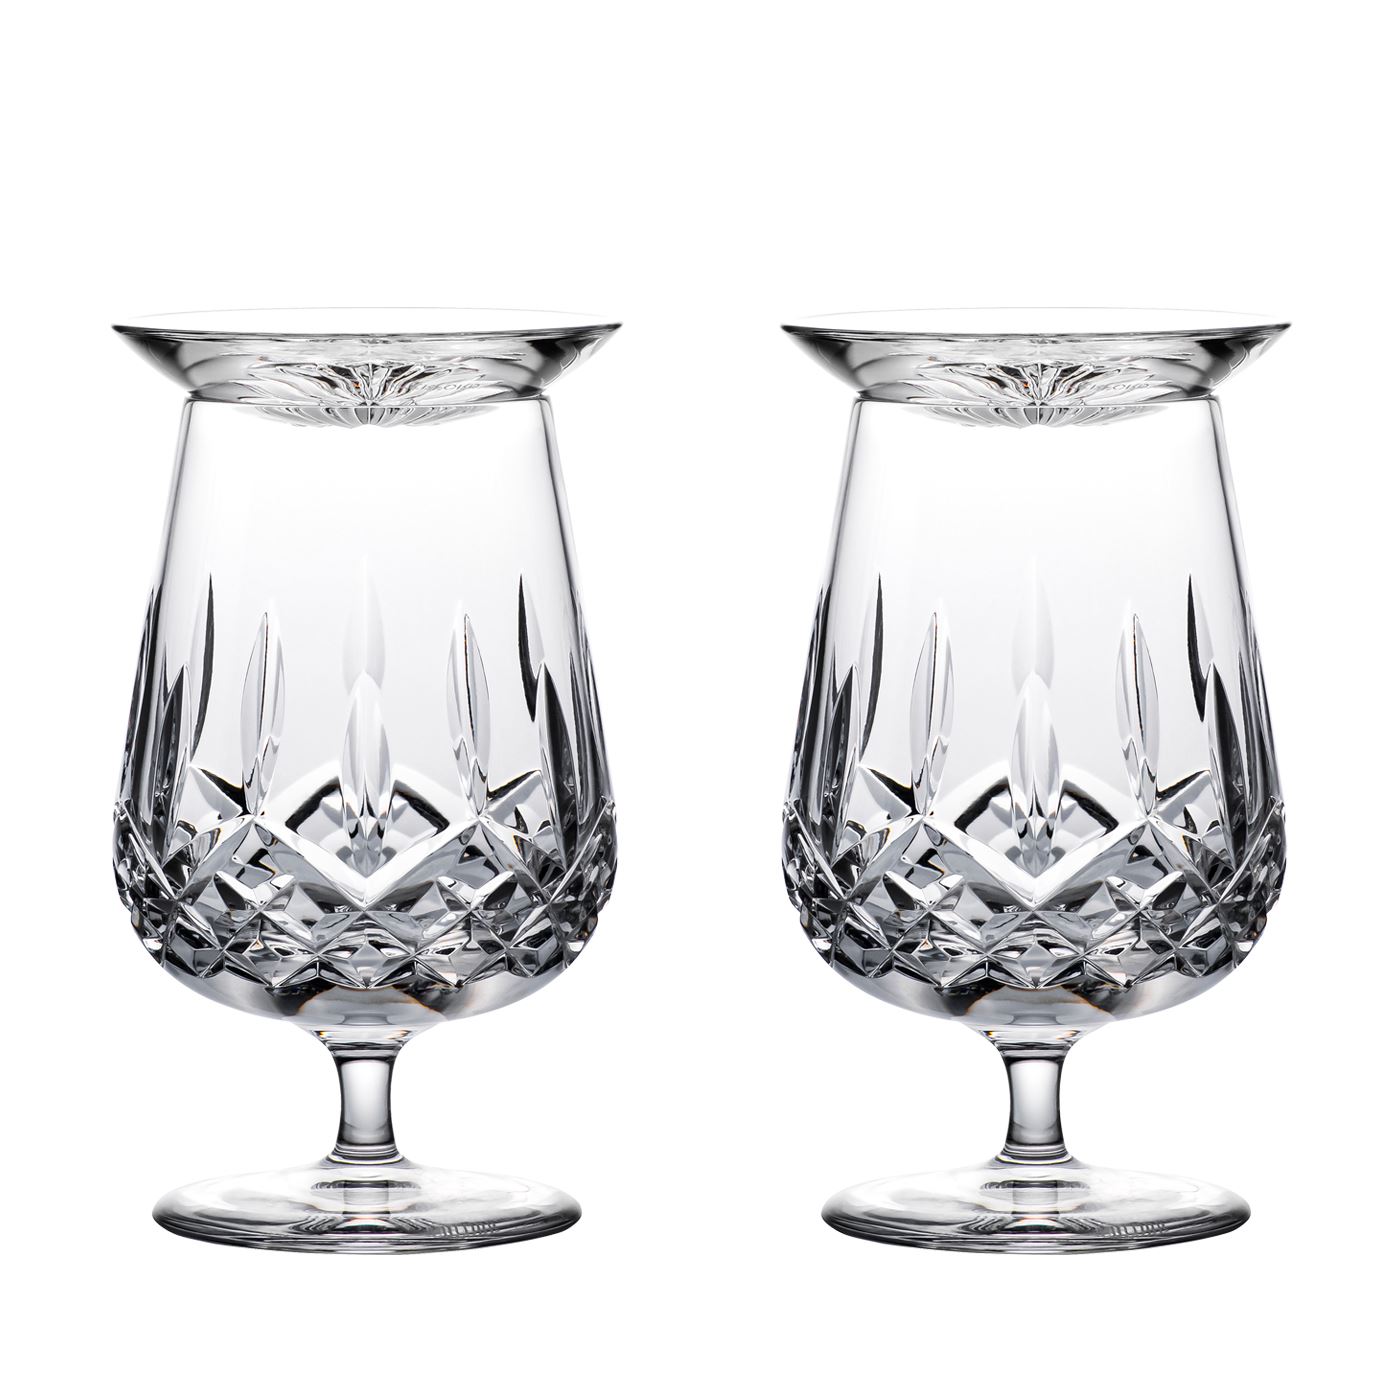 Lot - A SET OF FIVE WATERFORD CUT CRYSTAL BRANDY SNIFTERS IN THE